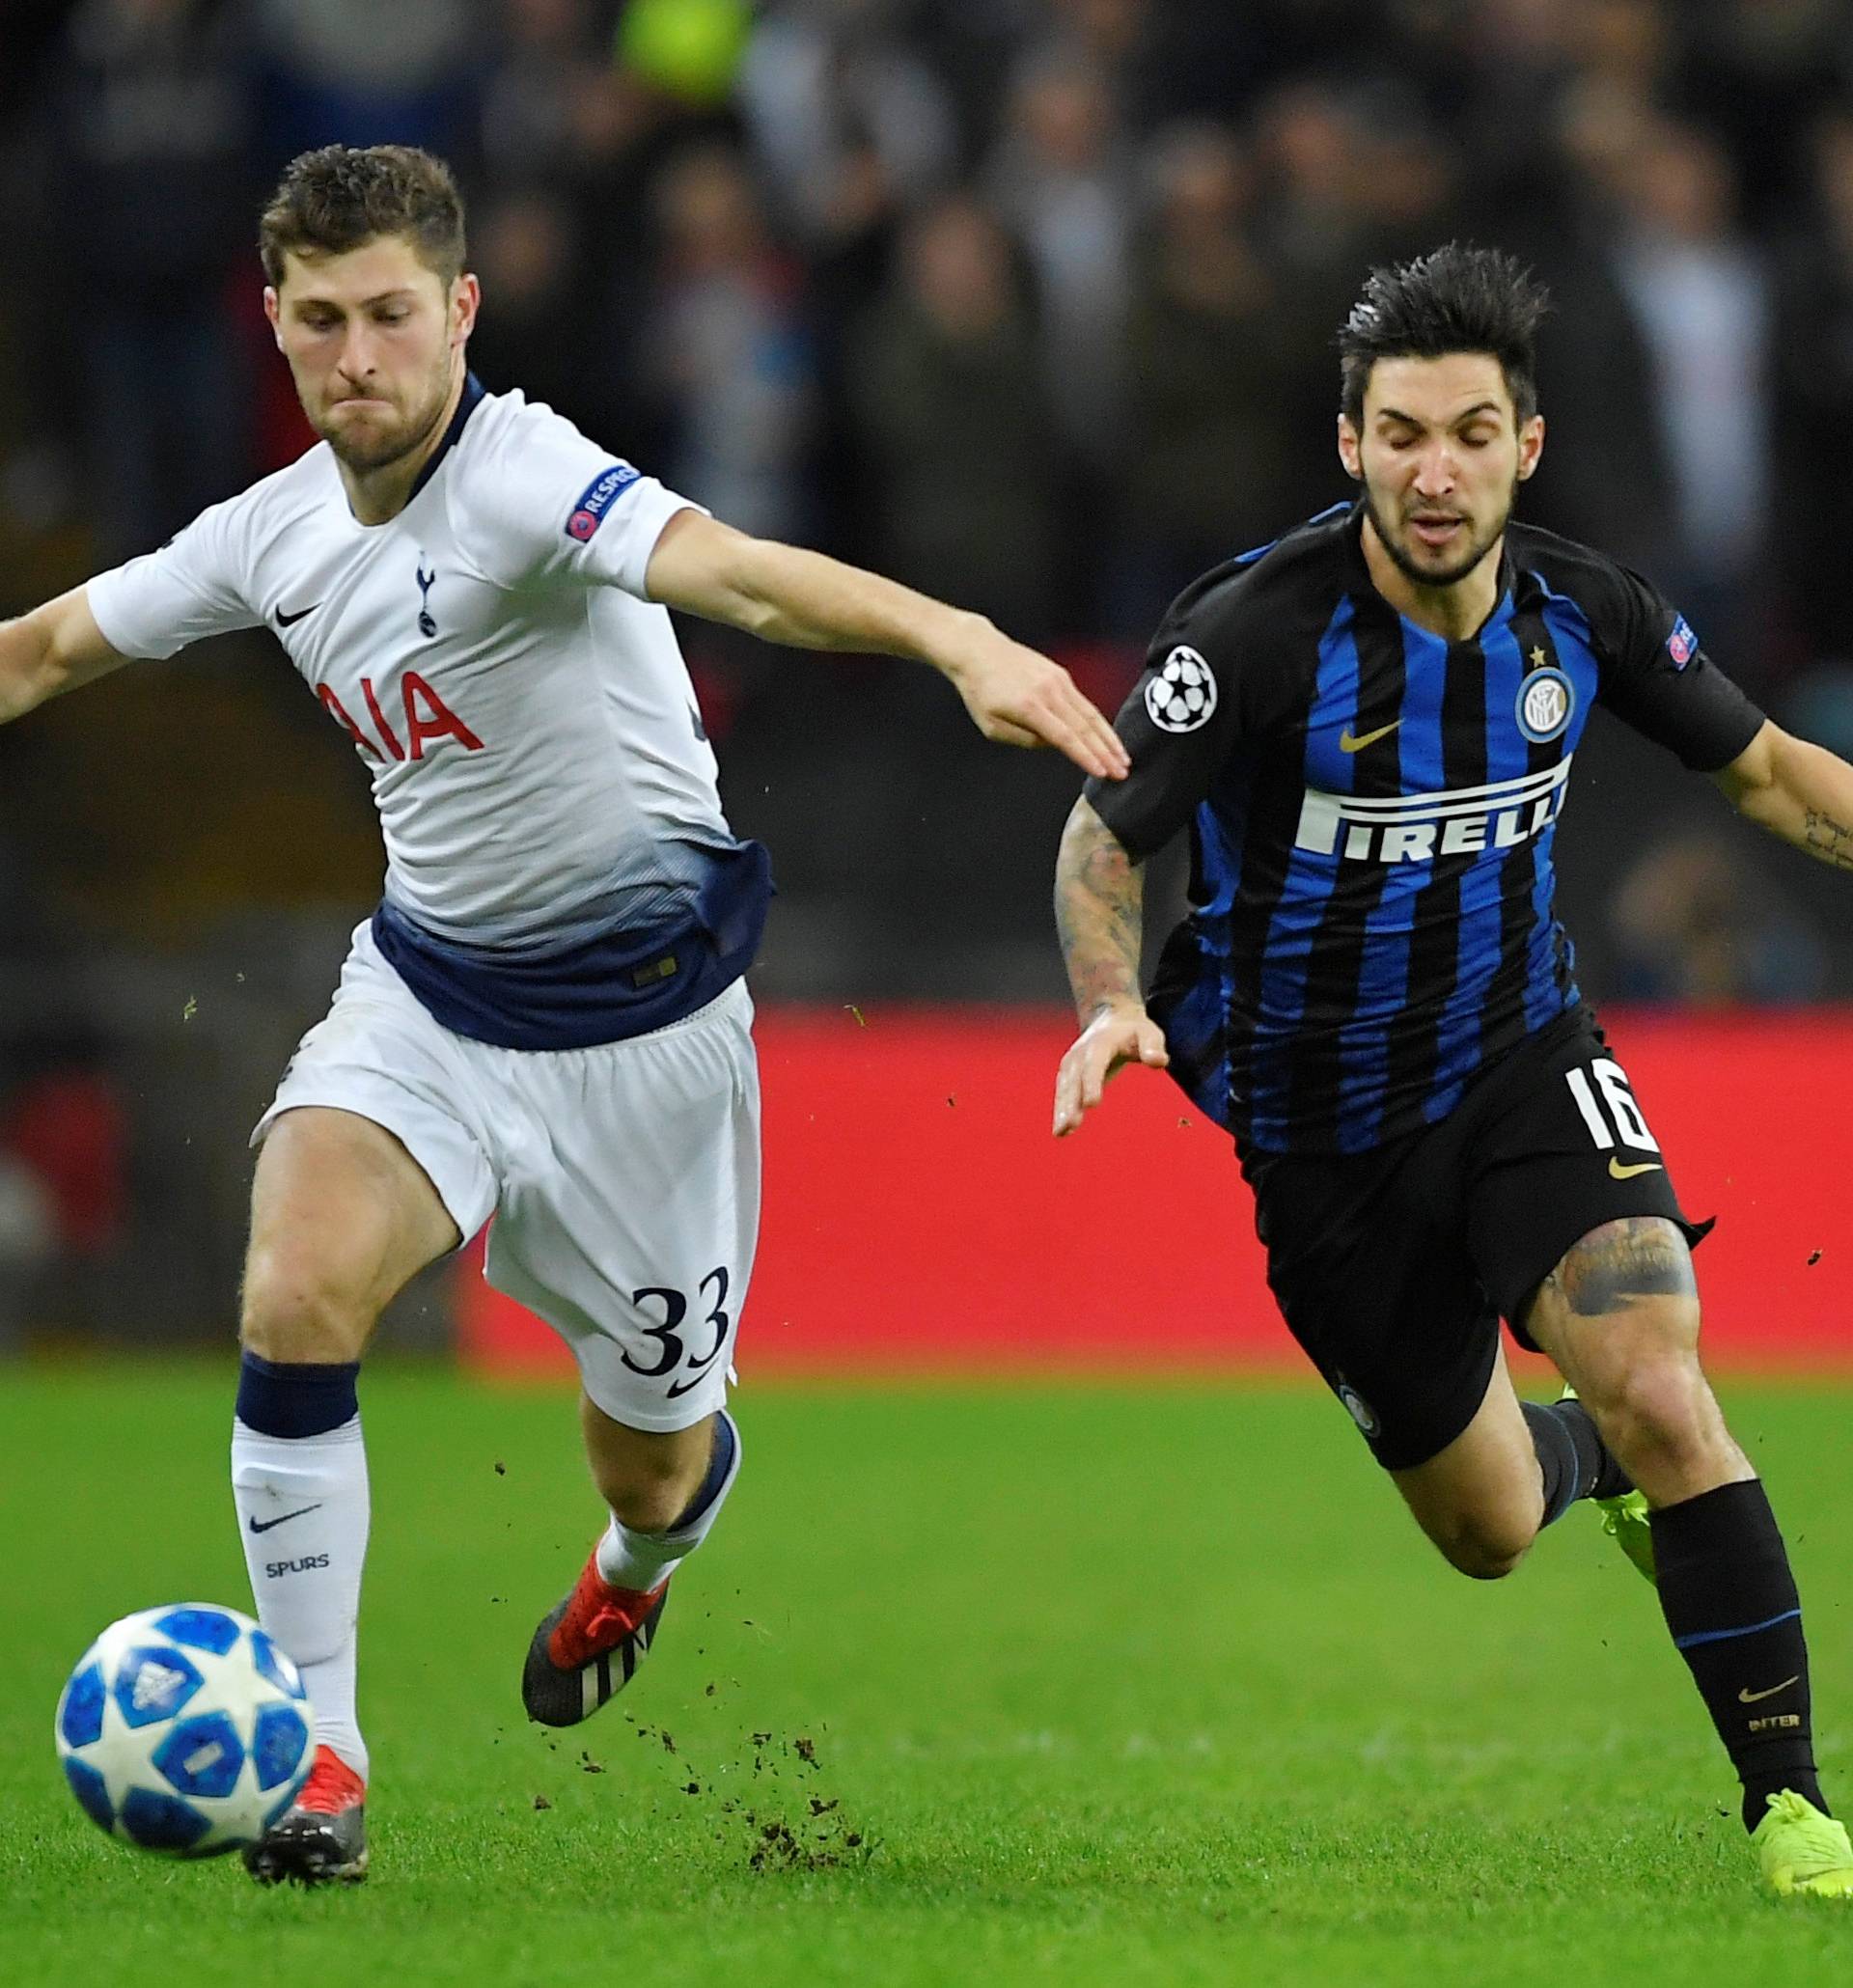 Champions League - Group Stage - Group B - Tottenham Hotspur v Inter Milan